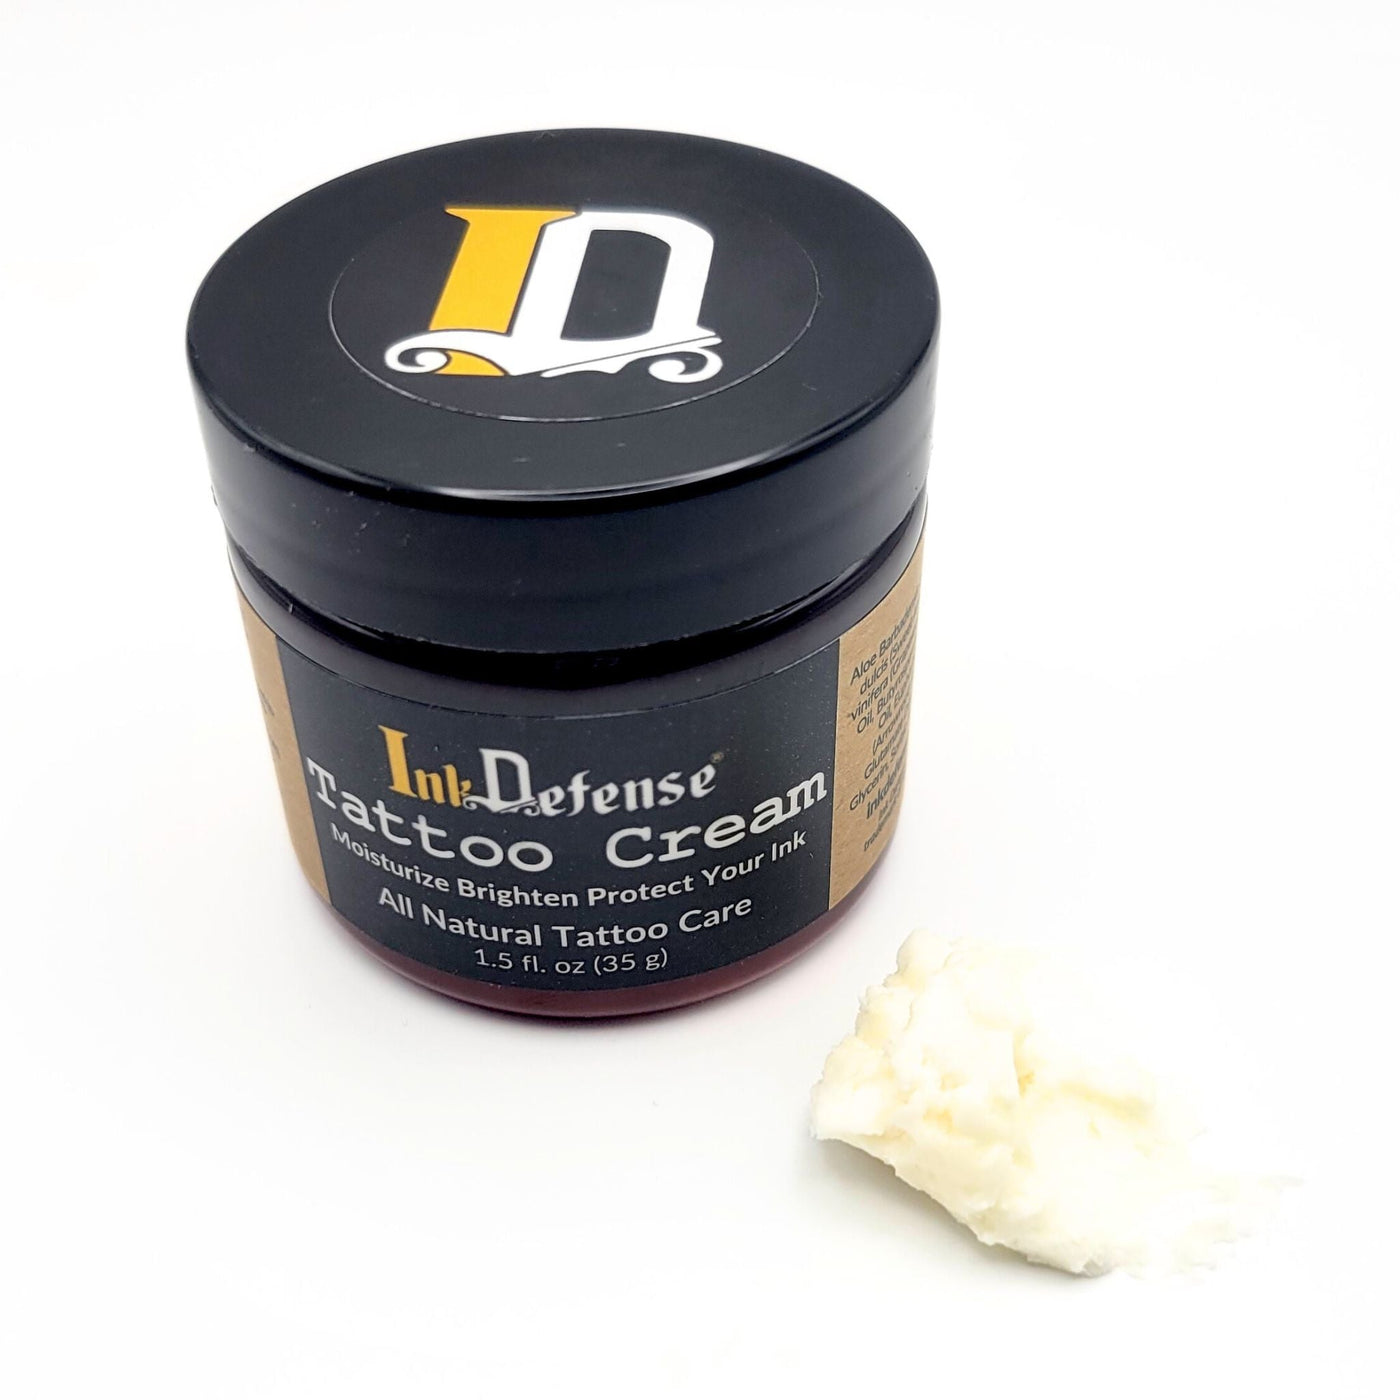 Tattoo Cream for tattoo aftercare with cream outside of container - Ink Defense